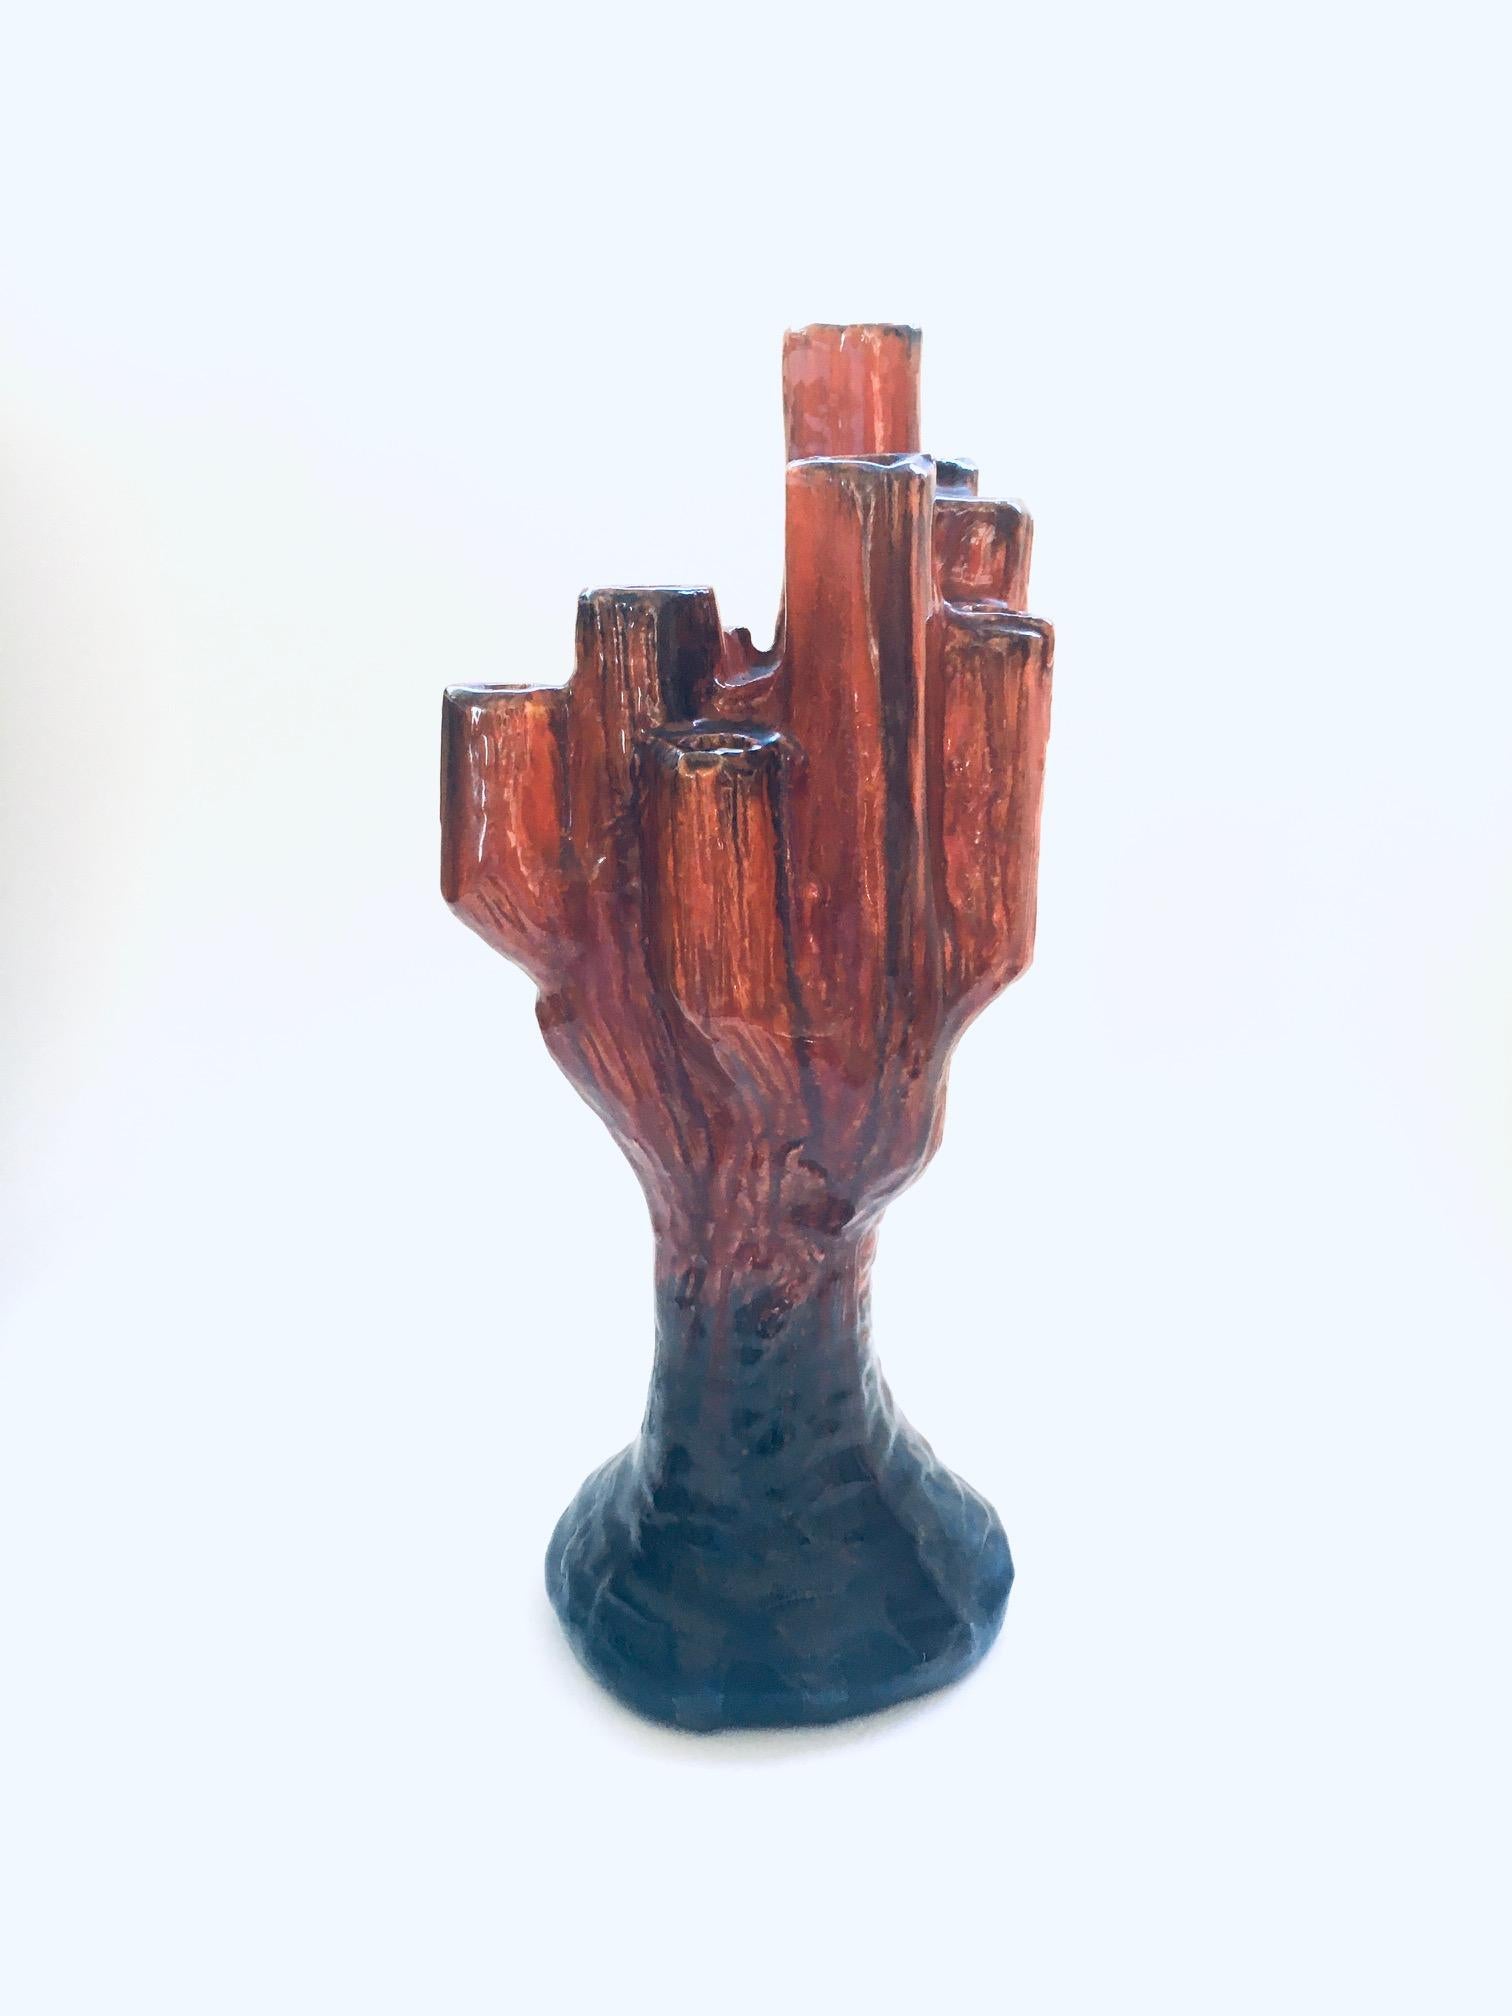 Vintage Midcentury Studio Art Pottery ceramic candle holder cactus shaped art object, signed F.B. Made in the 1960's. Brown and orange glazed ceramic free form object which can be used to hold candles. In very good condition. Measures 30cm x 13,5cm